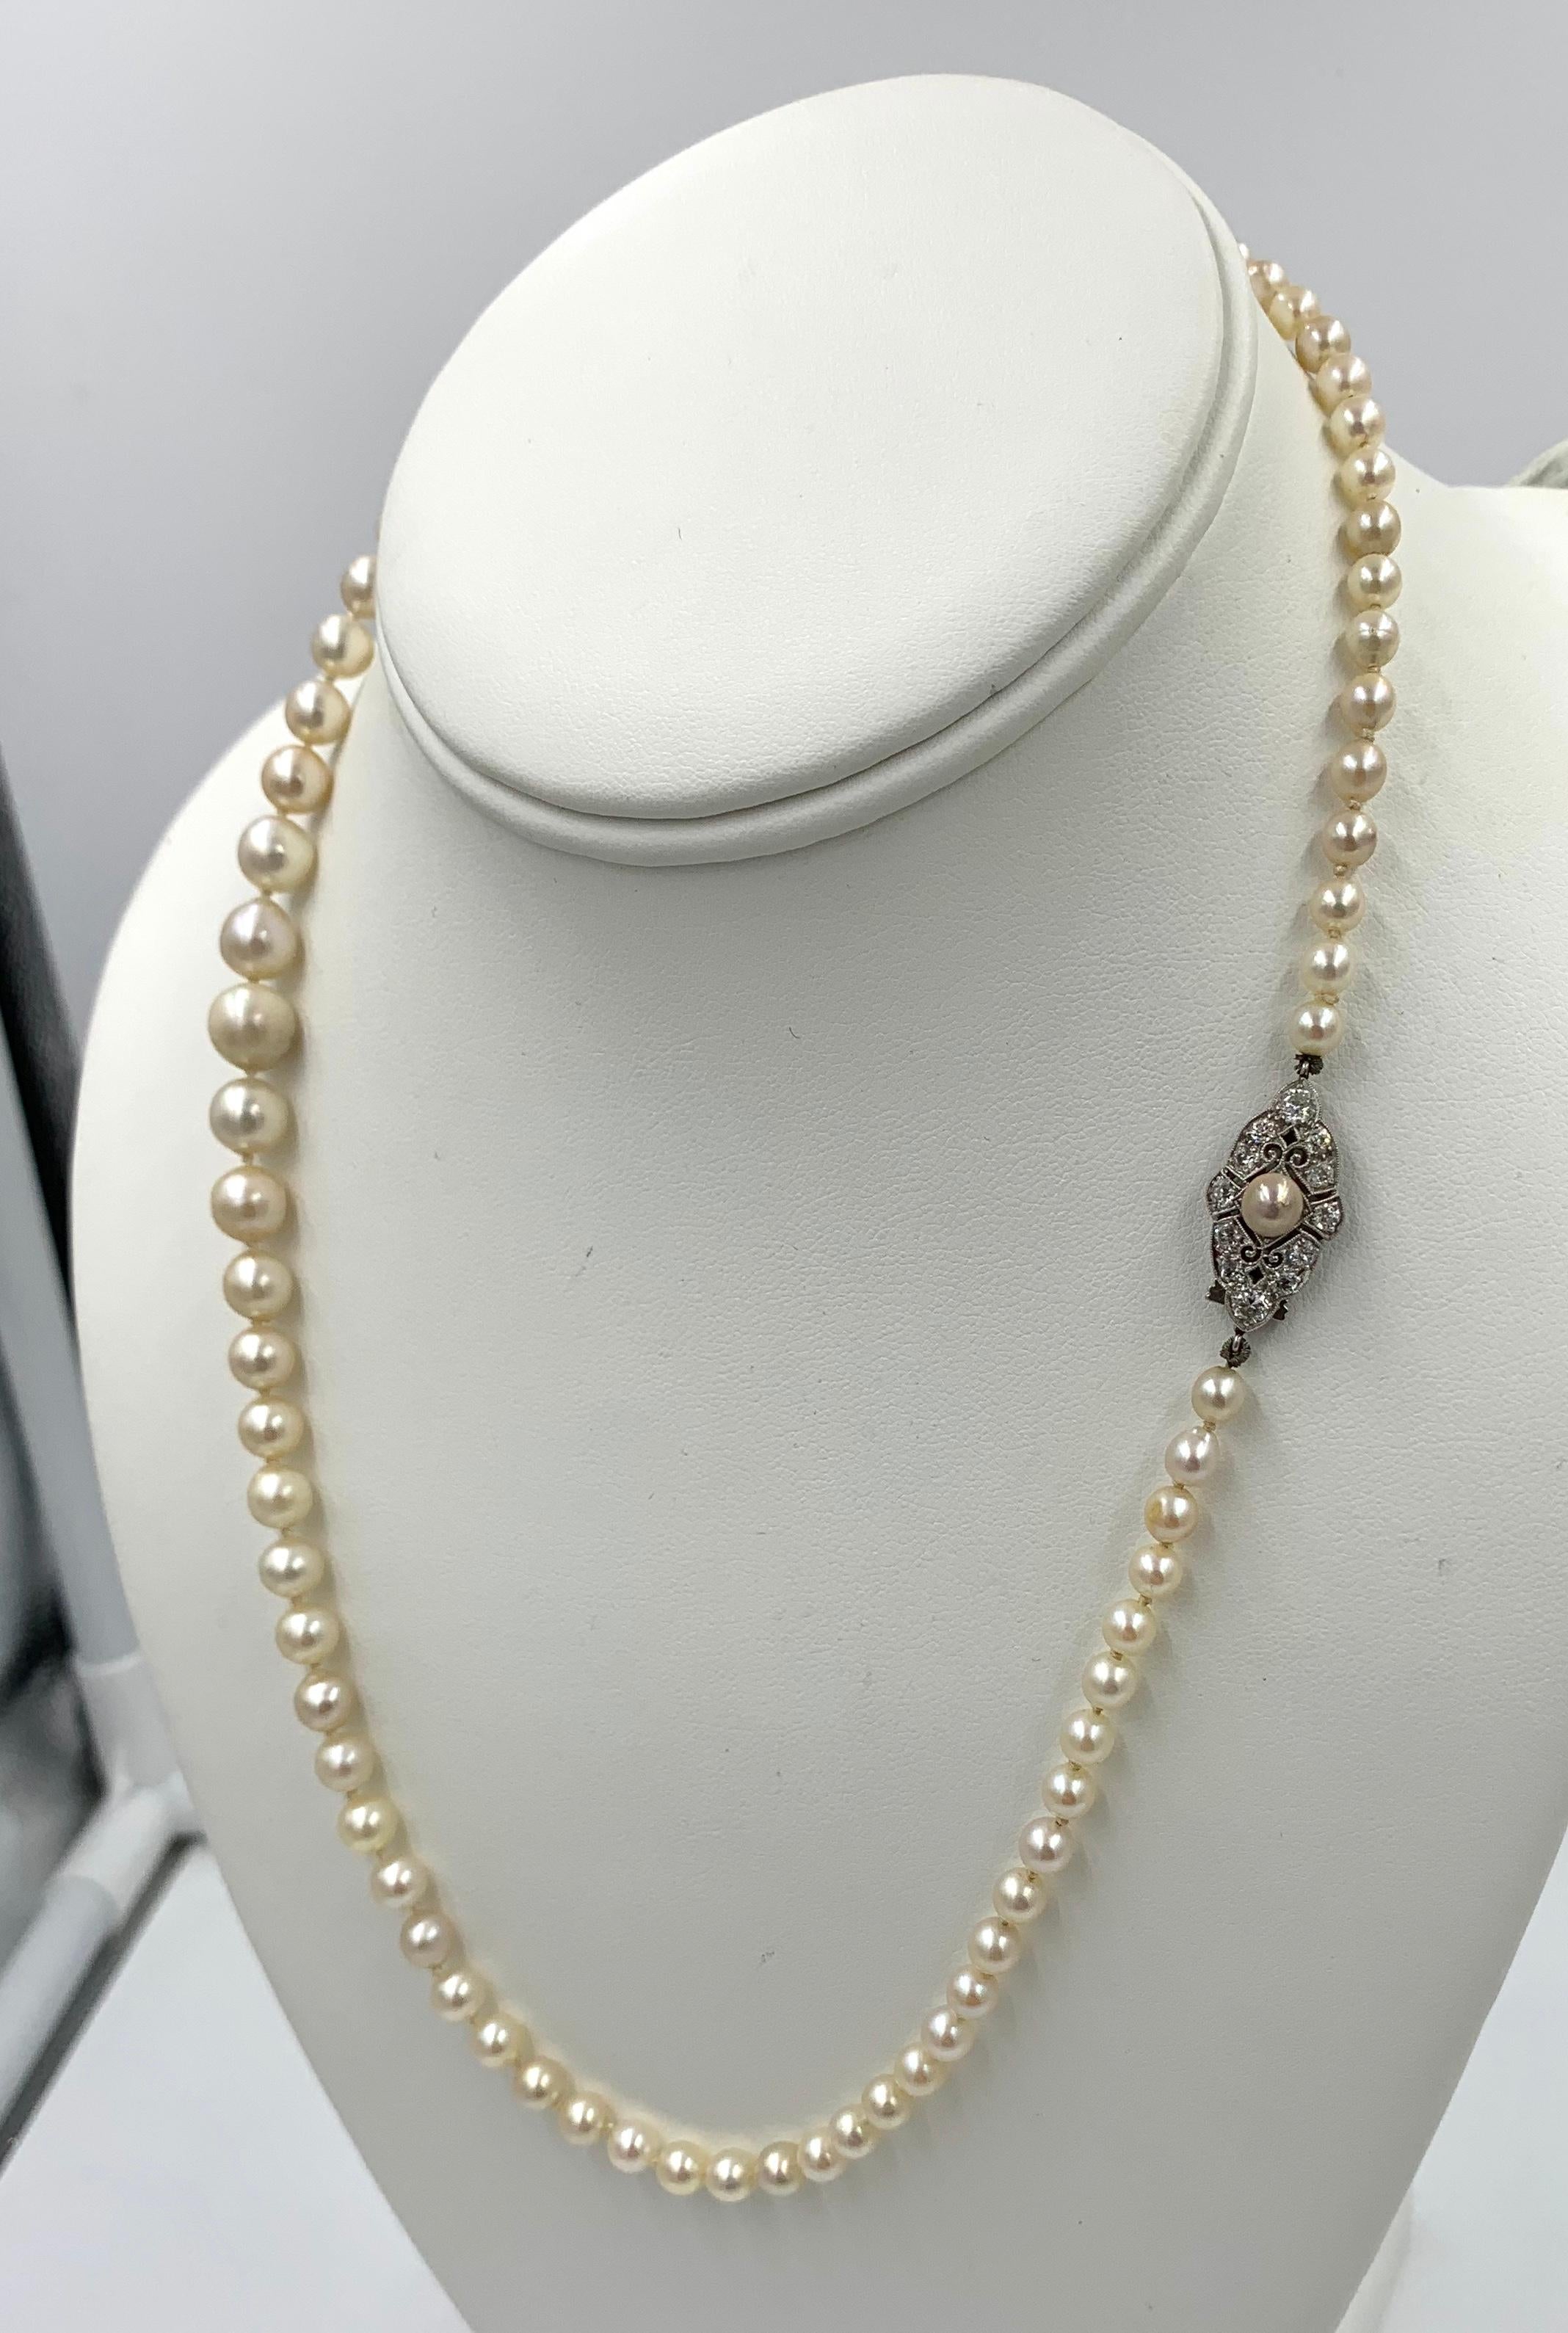 An extraordinary Edwardian - Victorian Graduated Pearl Necklace with 12 Old European Cut Diamonds totaling .7 Carat.  The brilliantly white diamonds are set with a gorgeous pearl in a romantic open work clasp in Platinum.  The Pearls are cultured